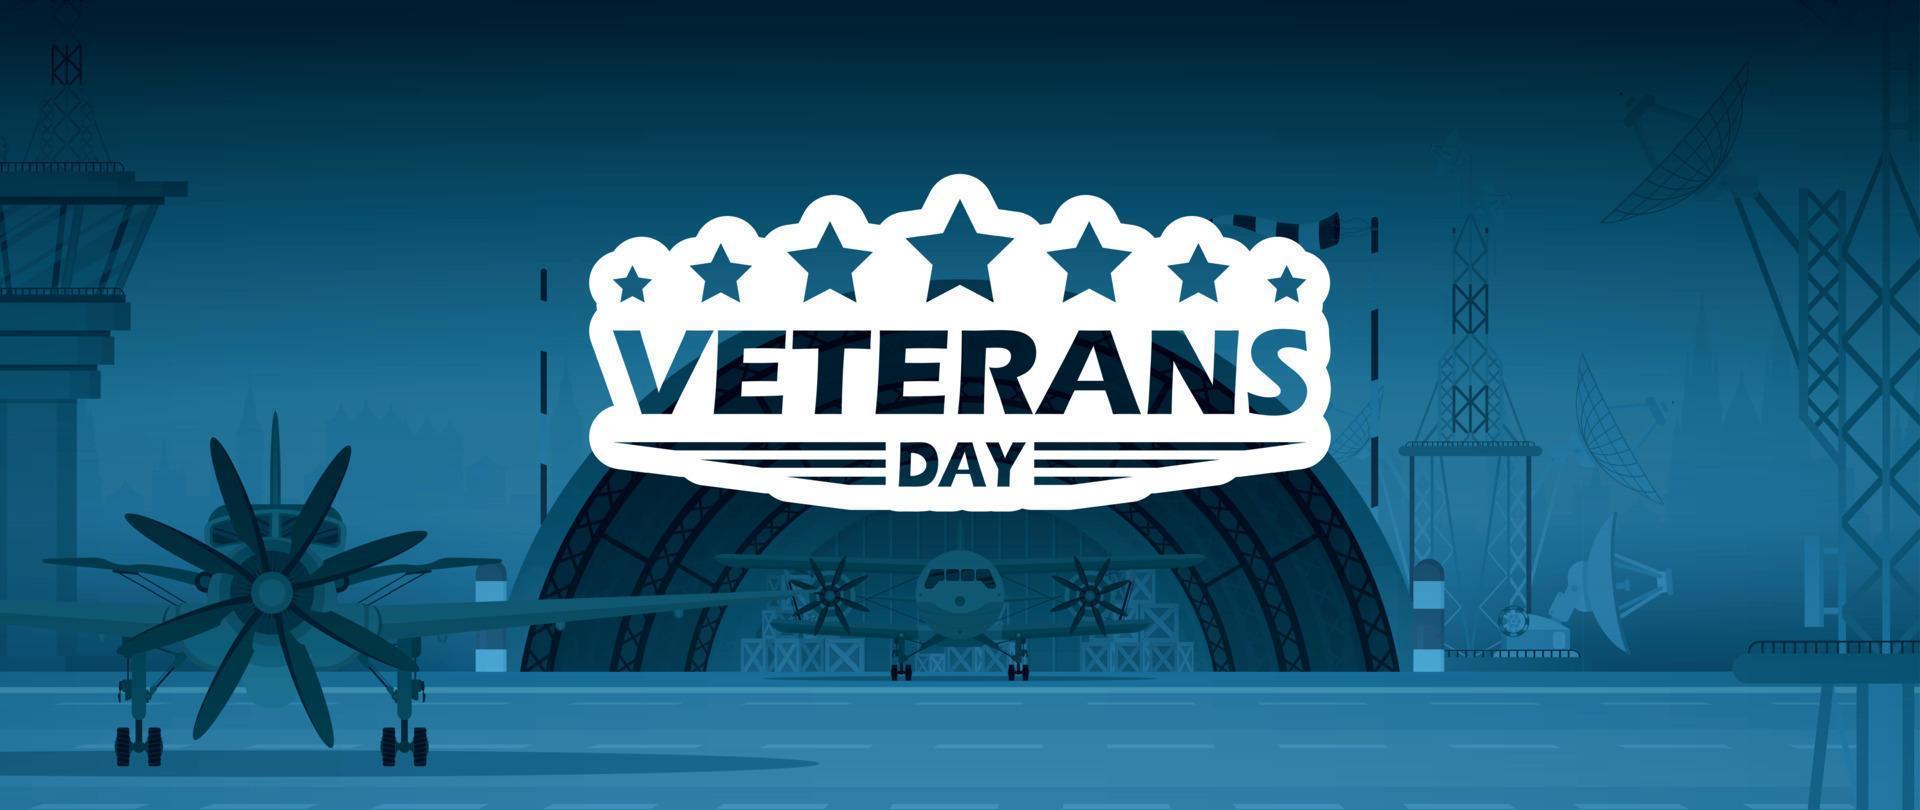 Veterans day banner. Military airport in the background. Cartoon style. vector